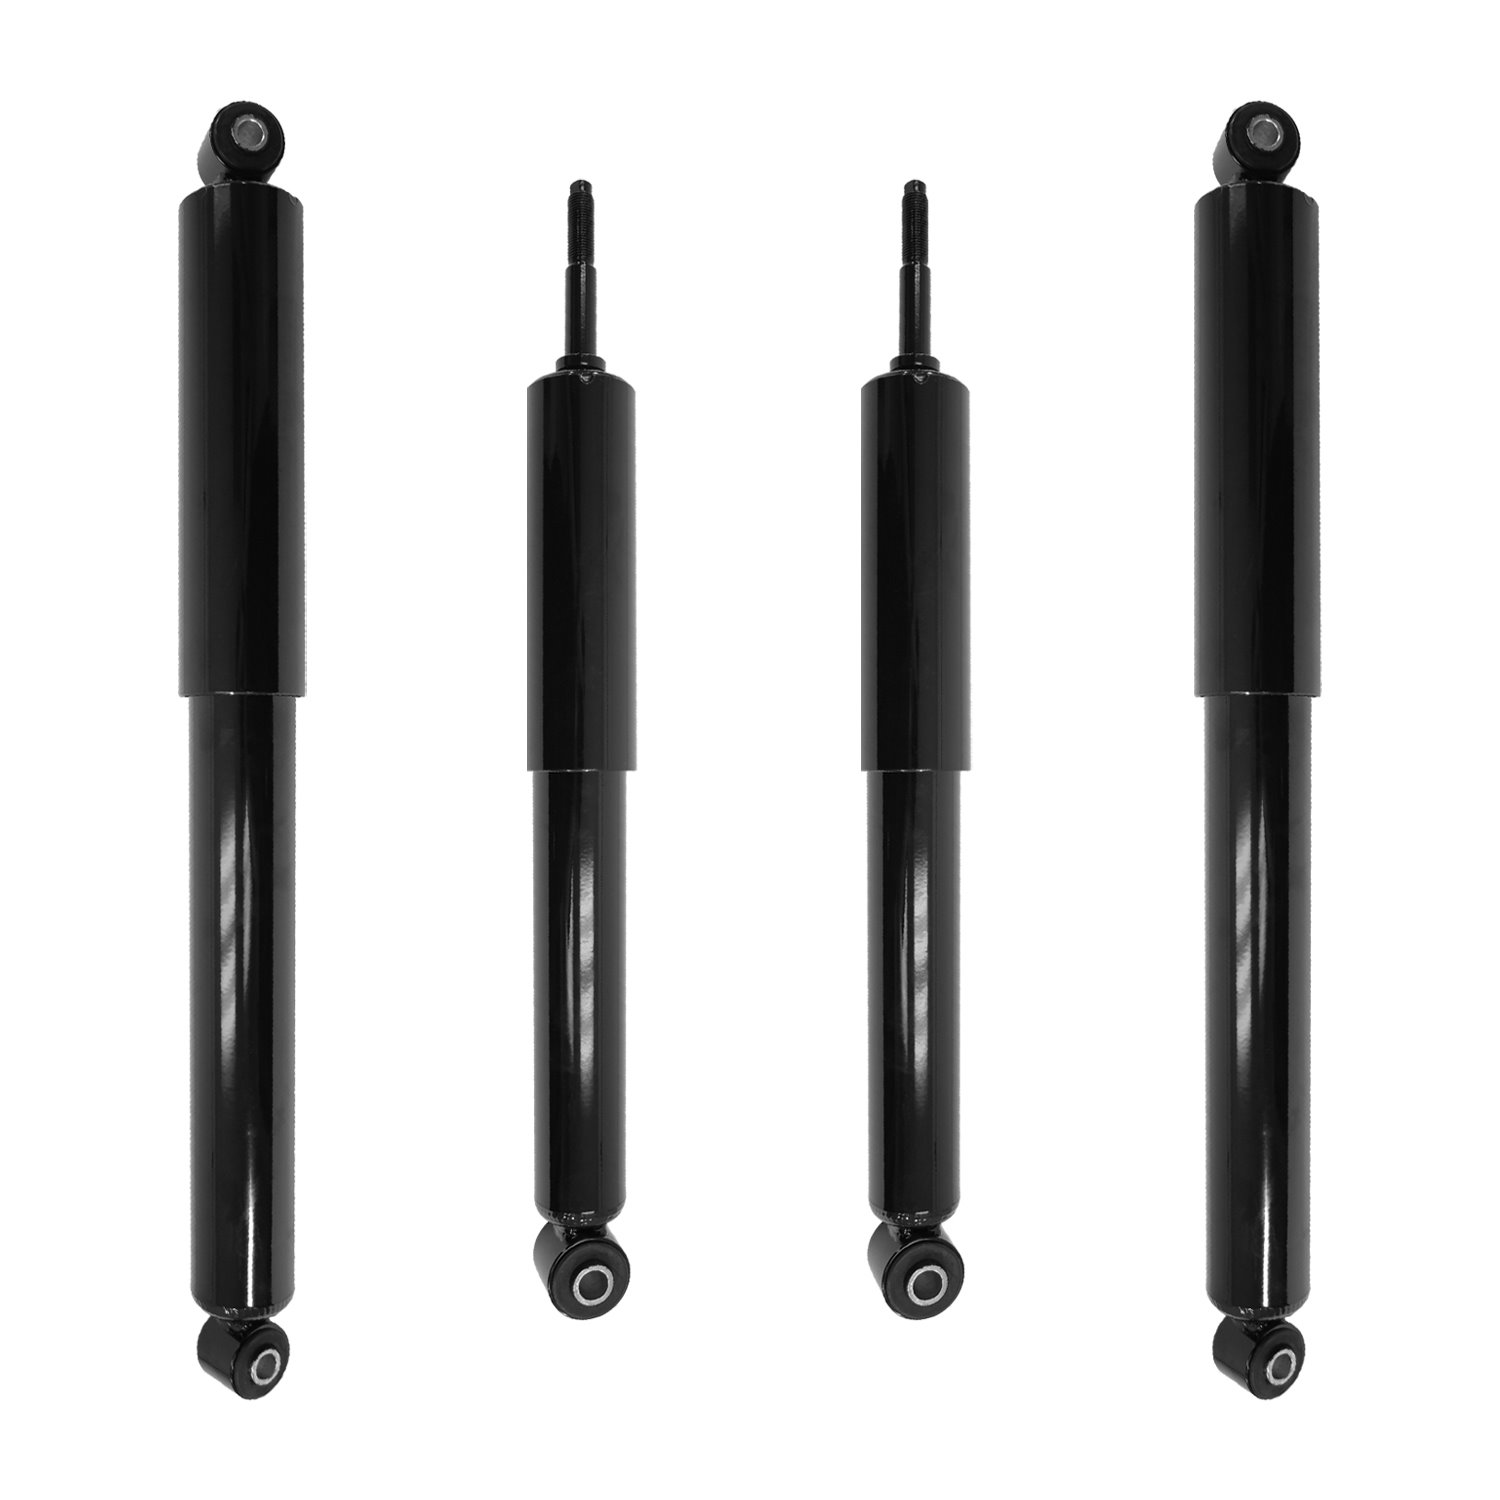 4-212080-253250-001 Front & Rear Nitrogen Gas Shock Absorber Kit Fits Select Ford Expedition, Ford F-250